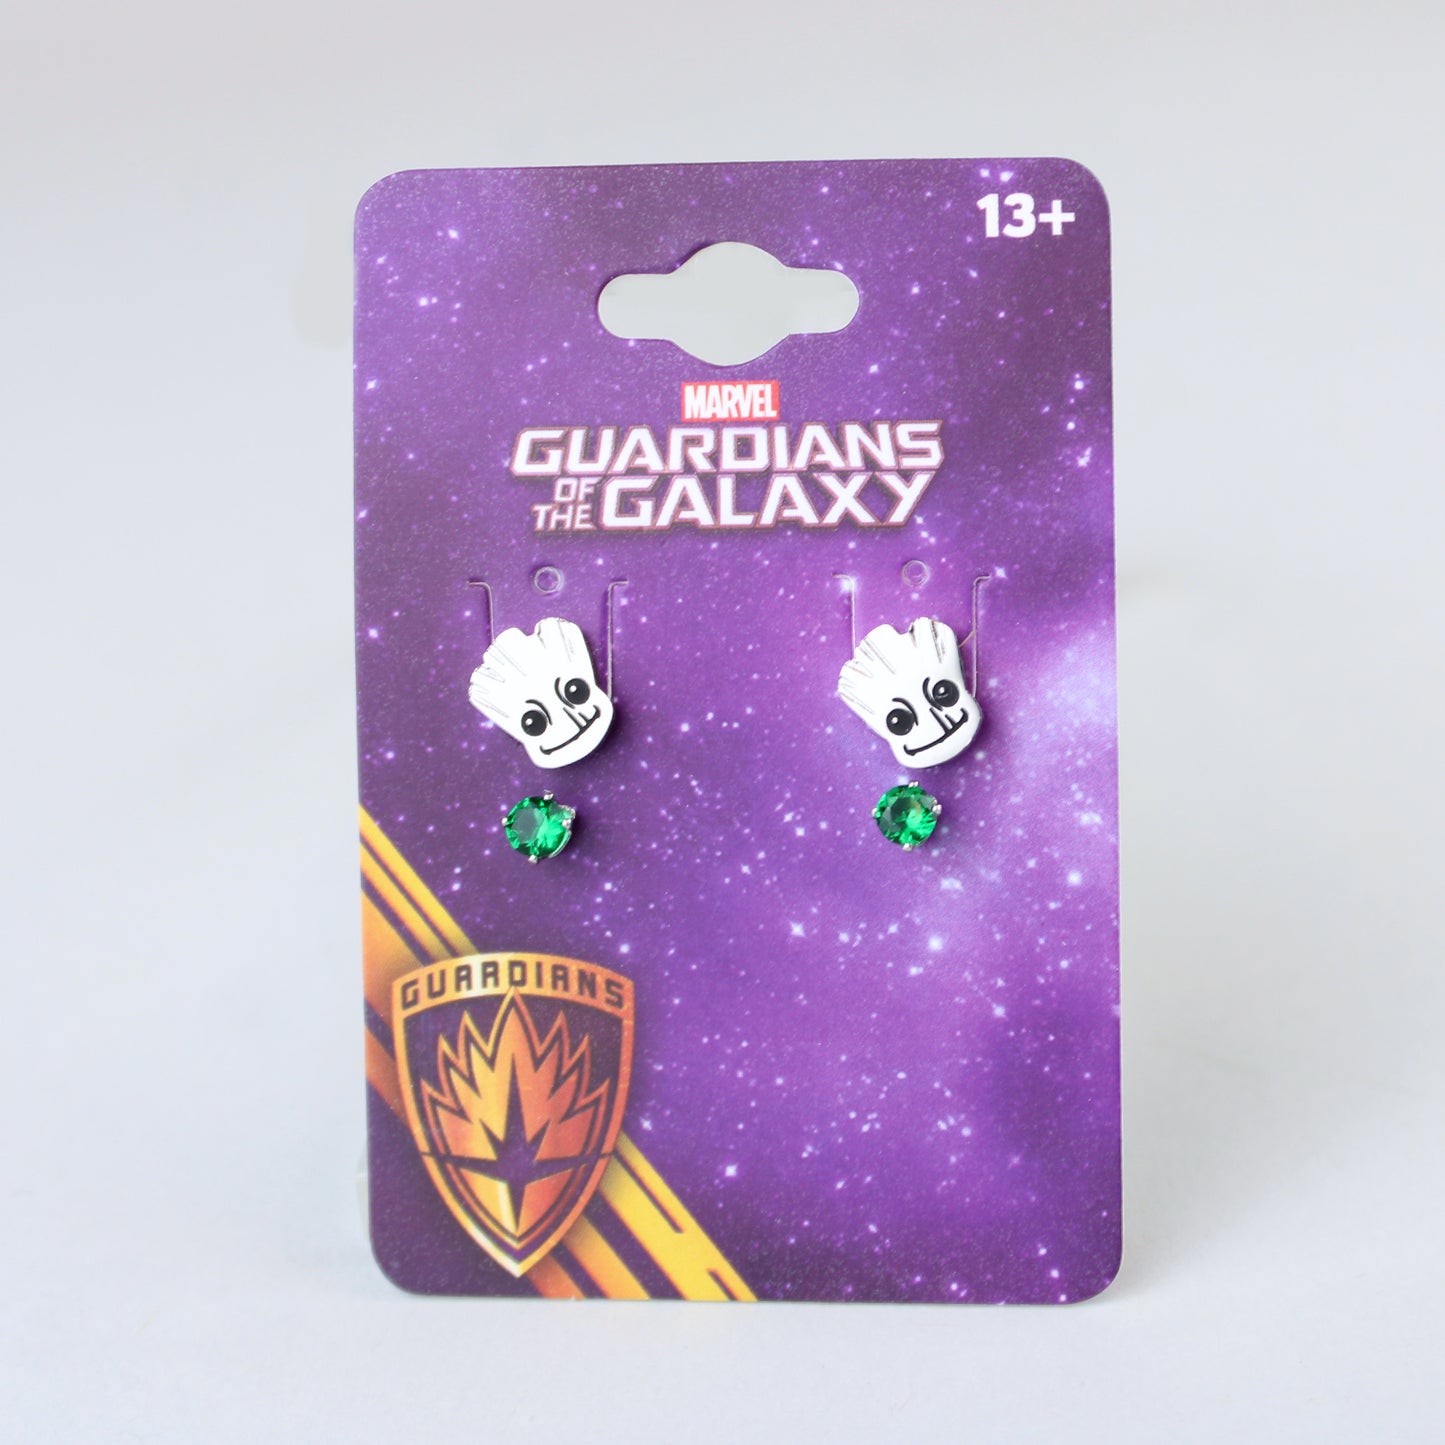 Baby Groot (Guardians of the Galaxy) Marvel Stud Earring Set